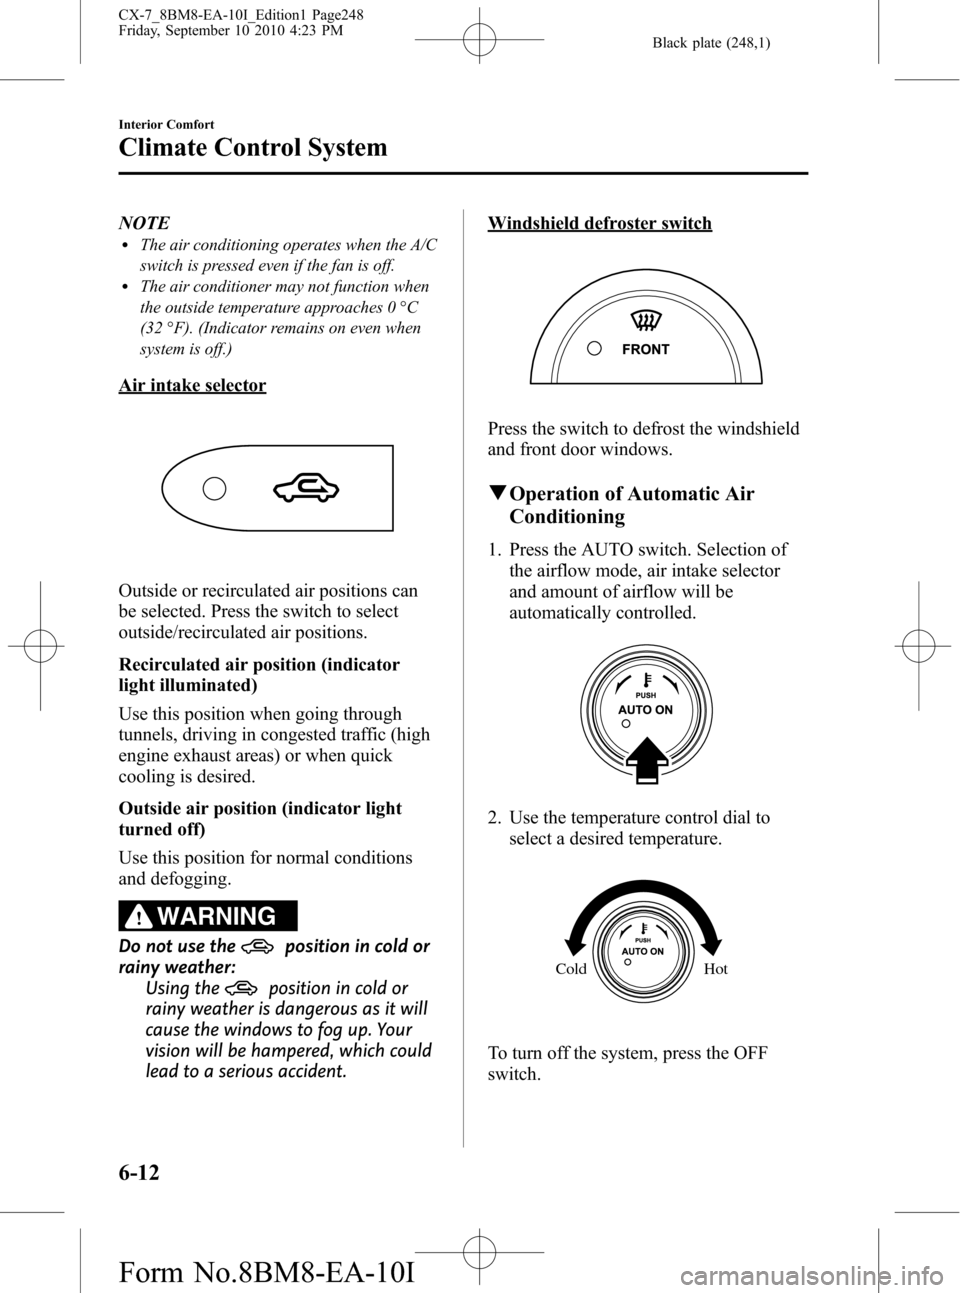 MAZDA MODEL CX-7 2011  Owners Manual (in English) Black plate (248,1)
NOTElThe air conditioning operates when the A/C
switch is pressed even if the fan is off.
lThe air conditioner may not function when
the outside temperature approaches 0 °C
(32 °